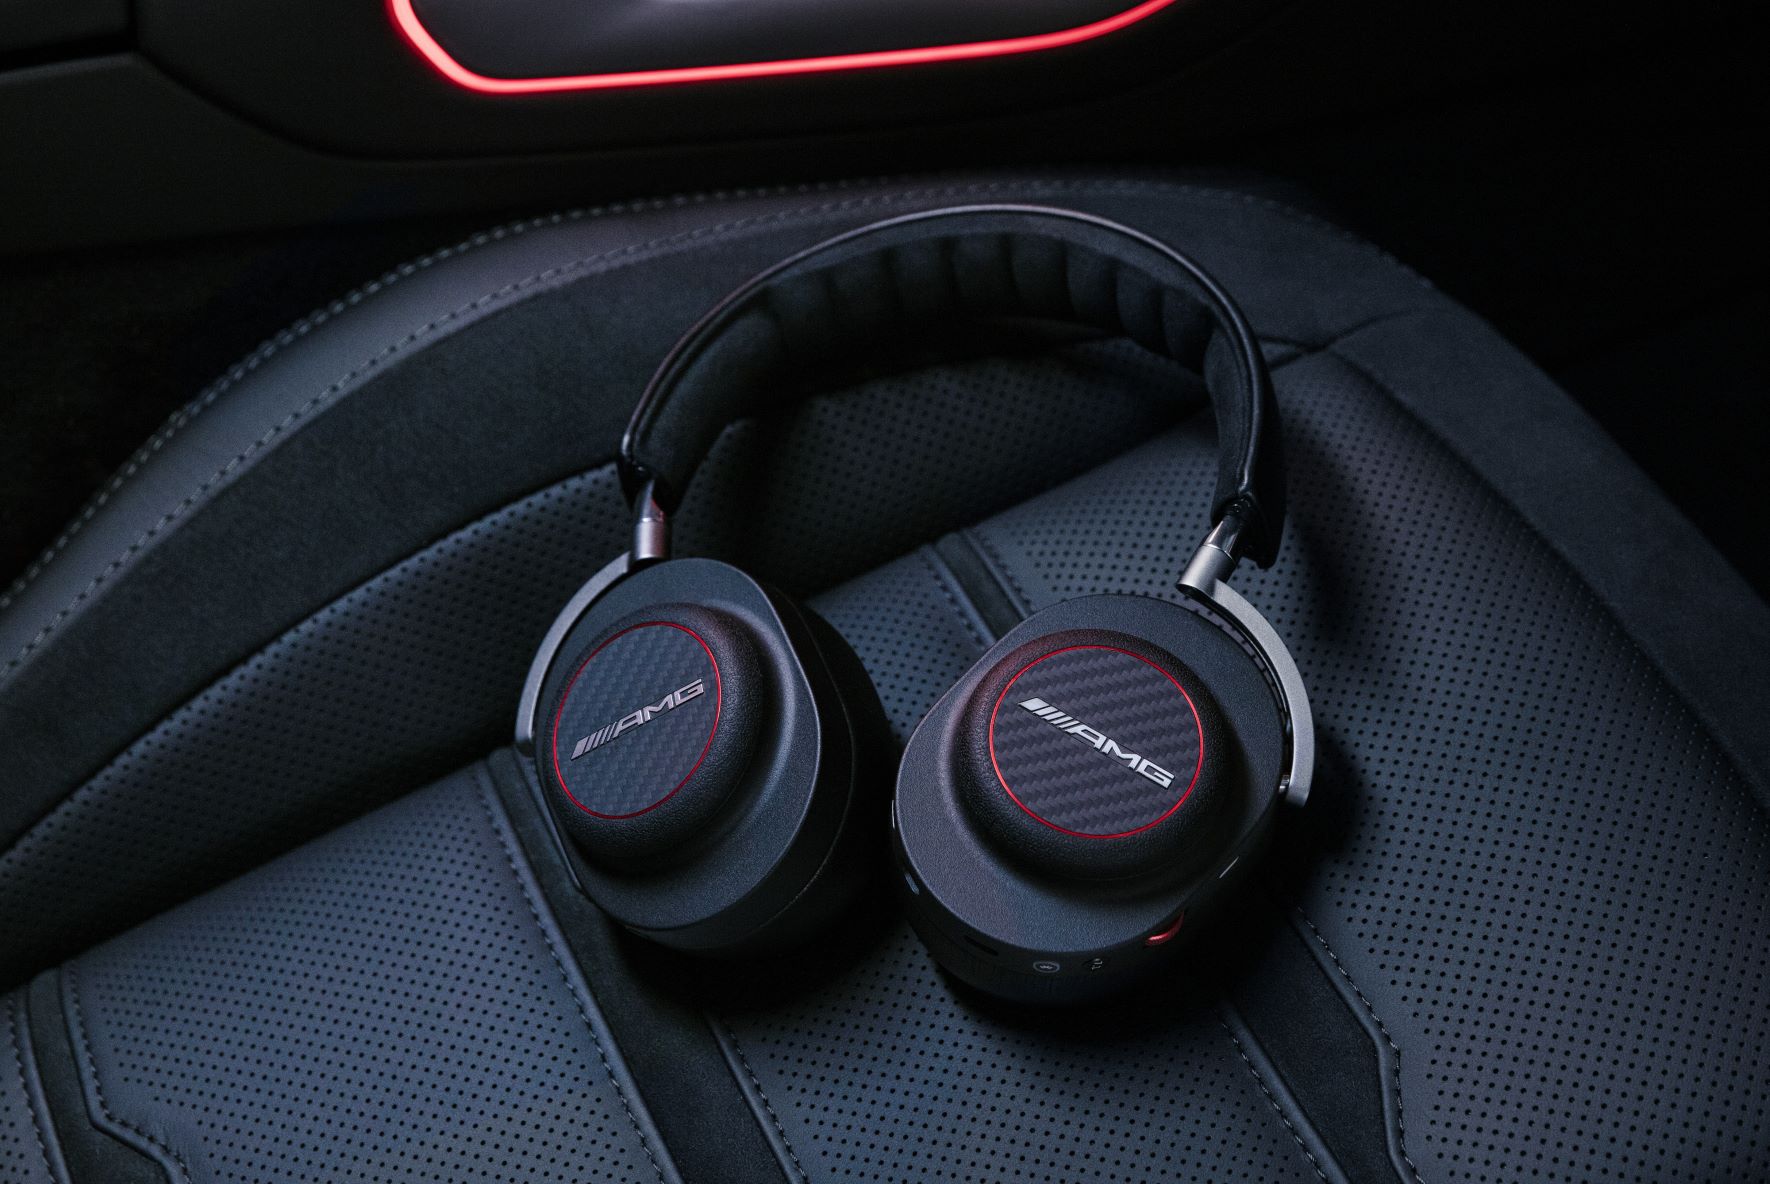 Mercedes-AMG headphones as part of the Master & Dynamic range